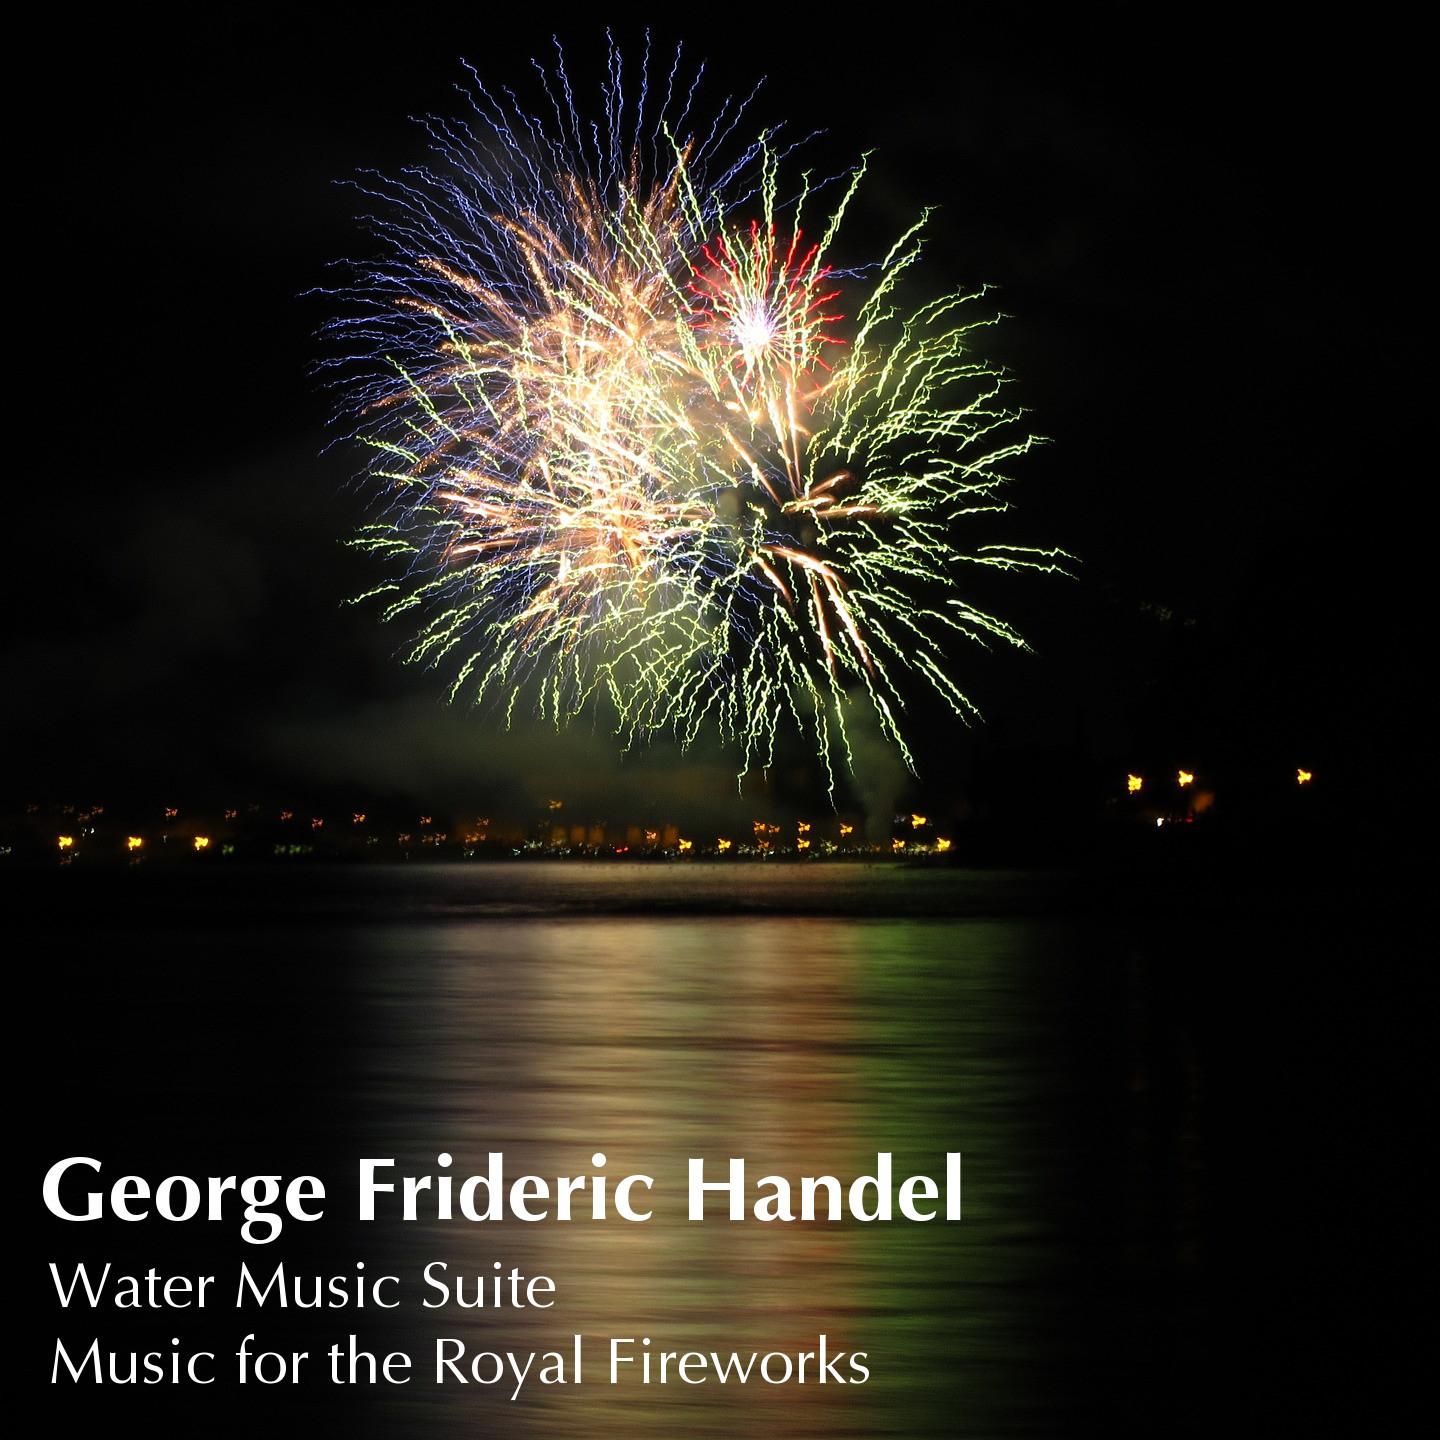 Music for the Royal Fireworks: Bourrée